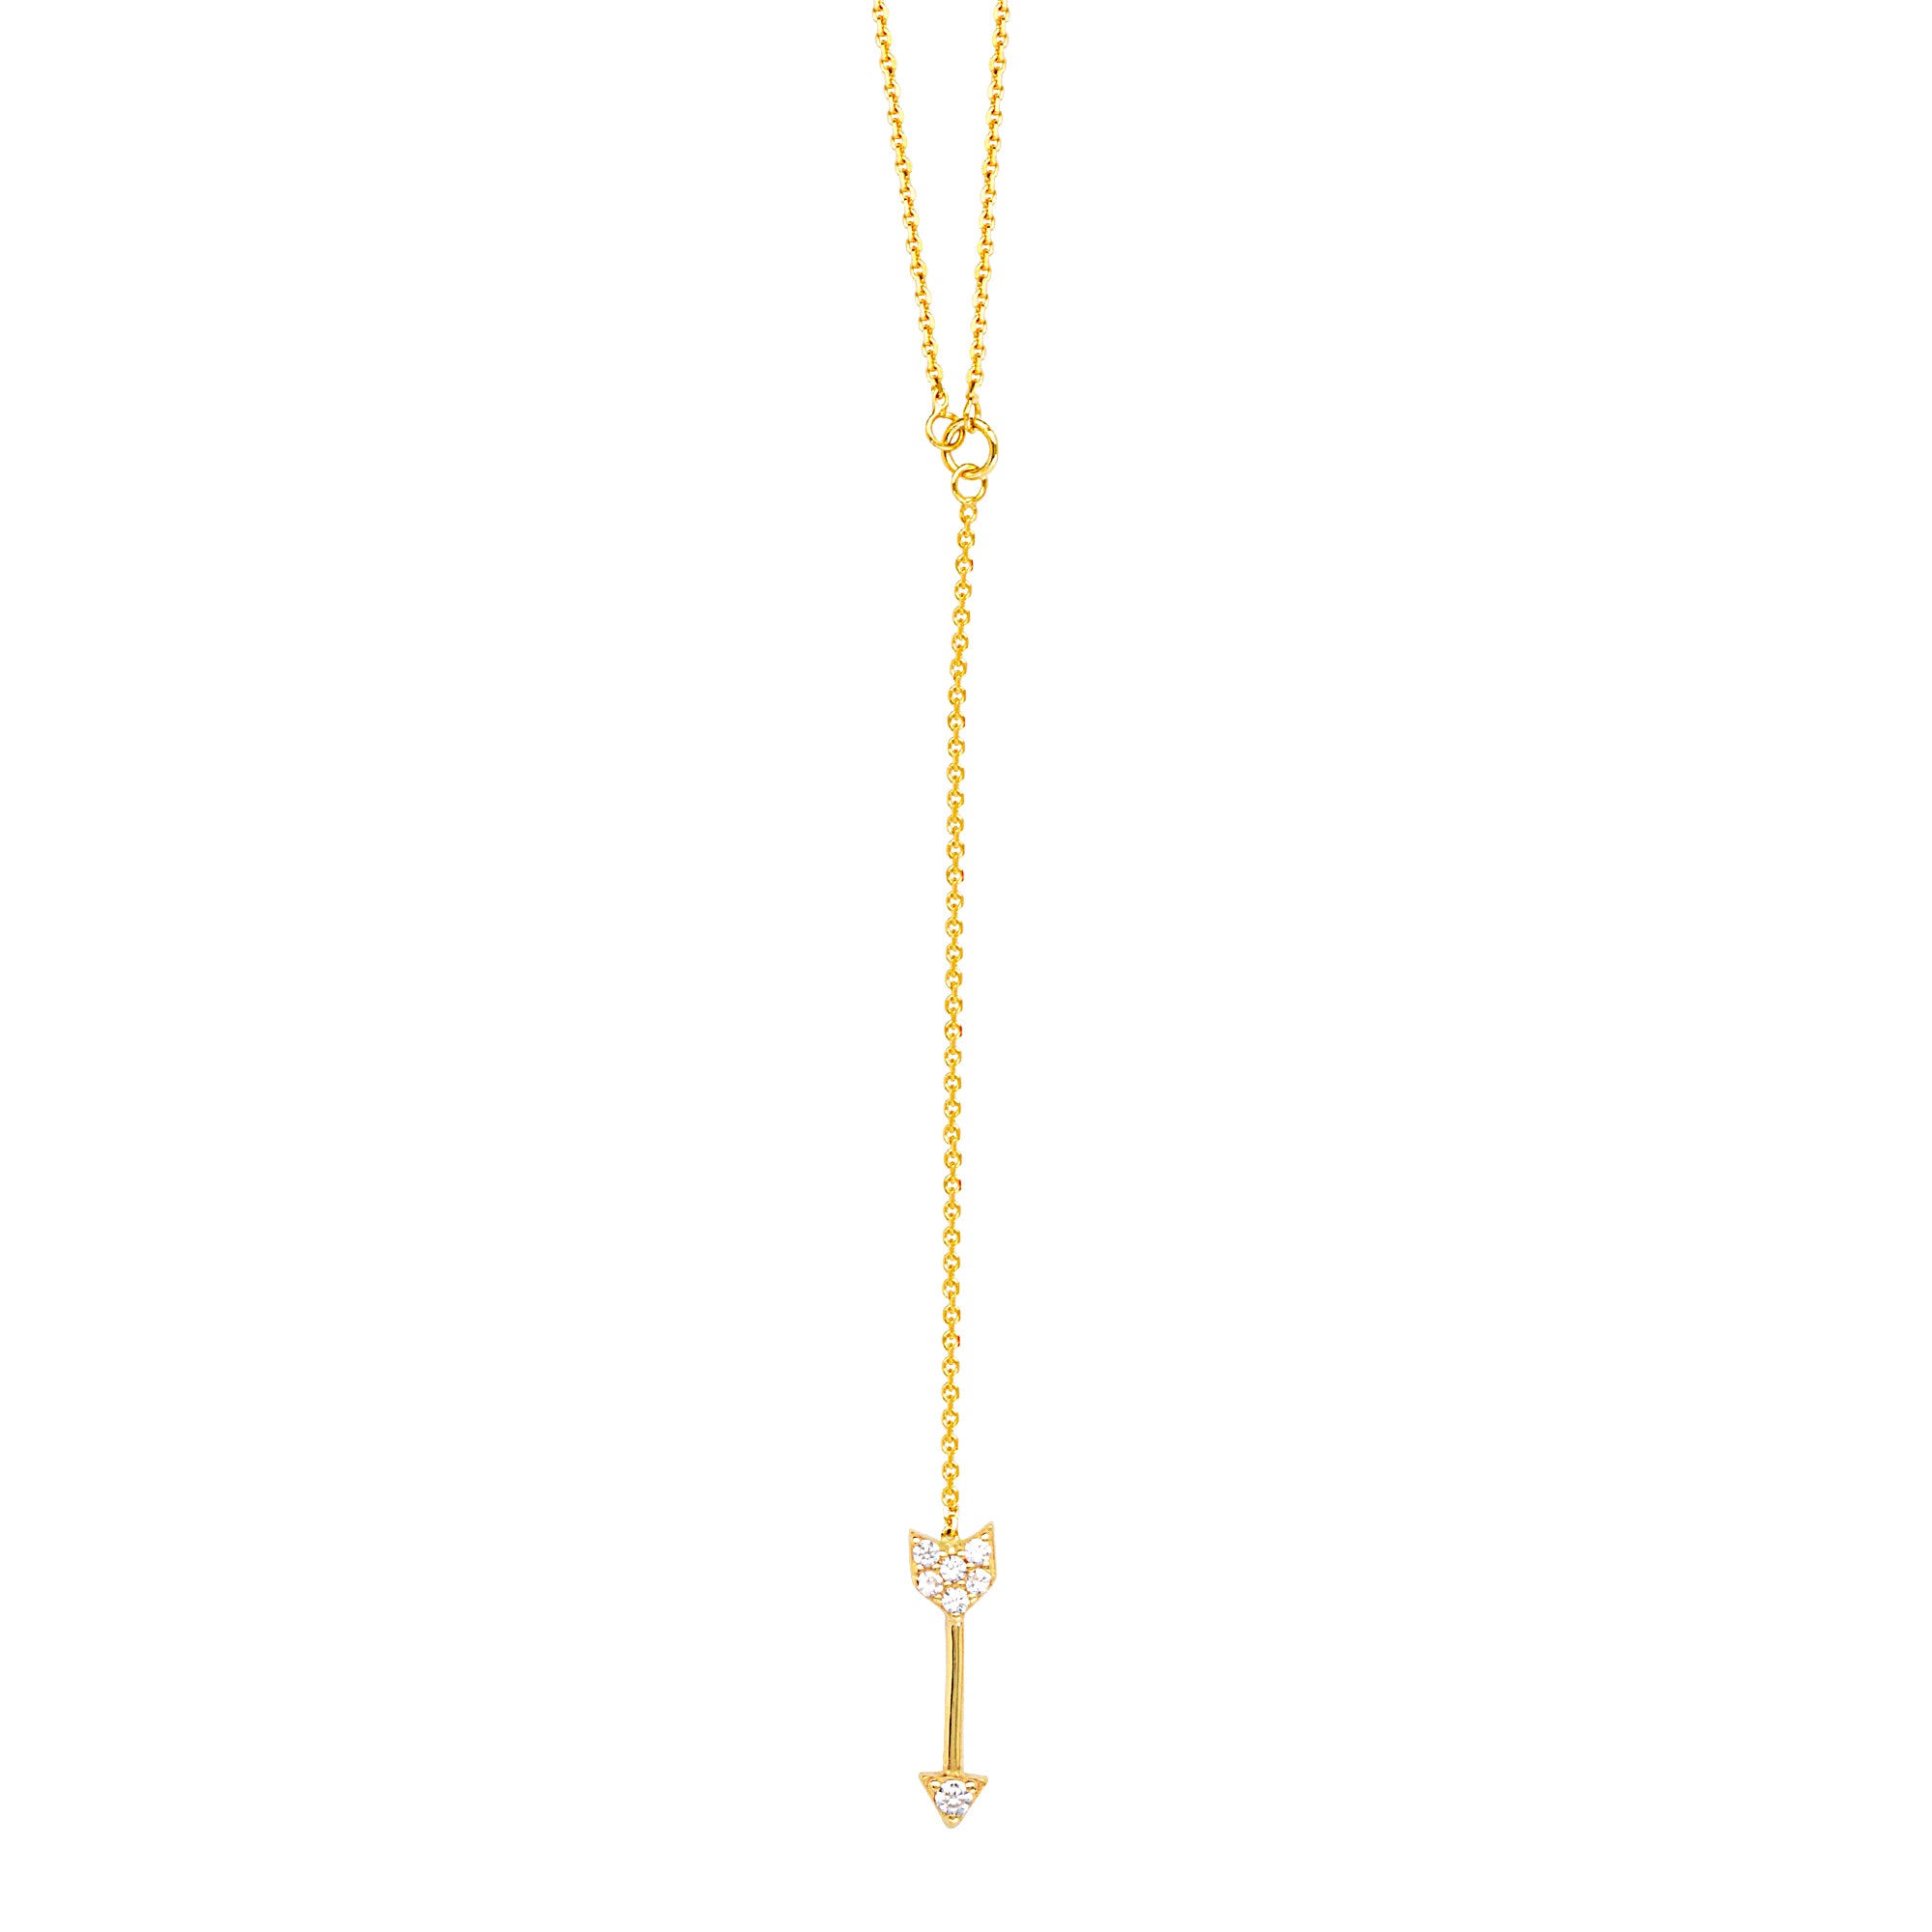 14K Yellow Gold Arrow Lariat Chain Drop Necklace